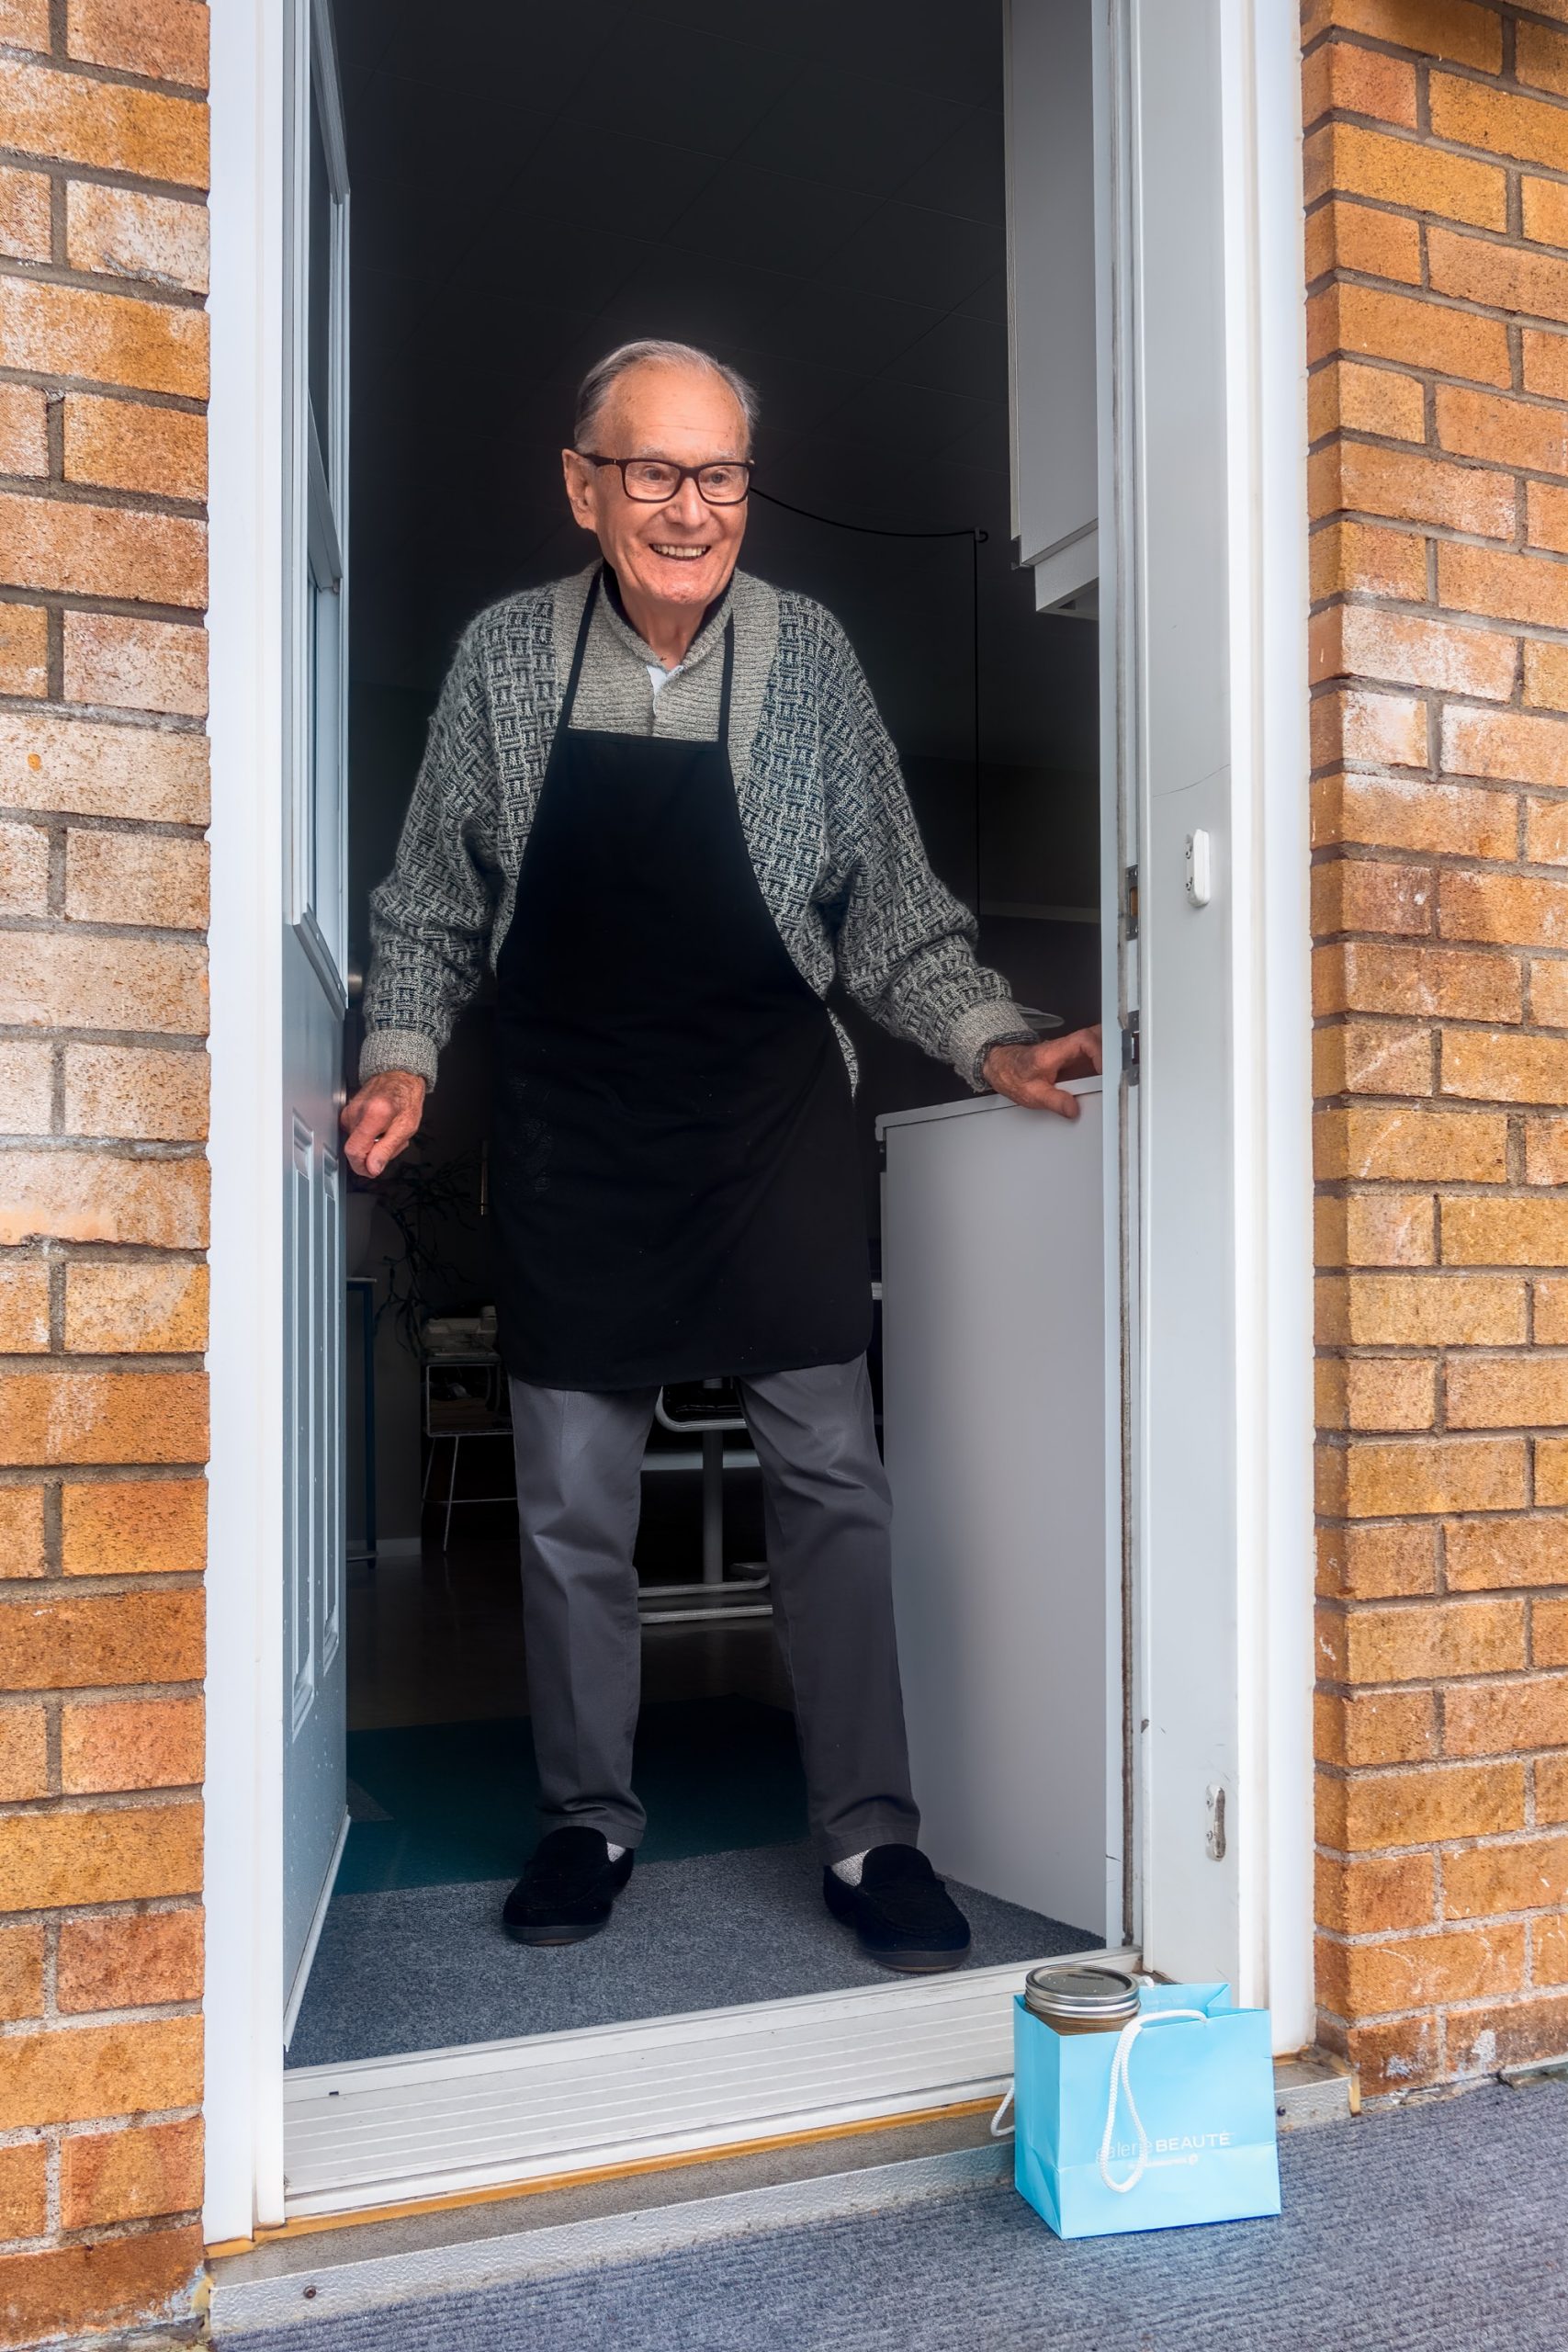 A 90 year old man receives a soup delivery. Photo by Andre Ouellett on Unsplash.com